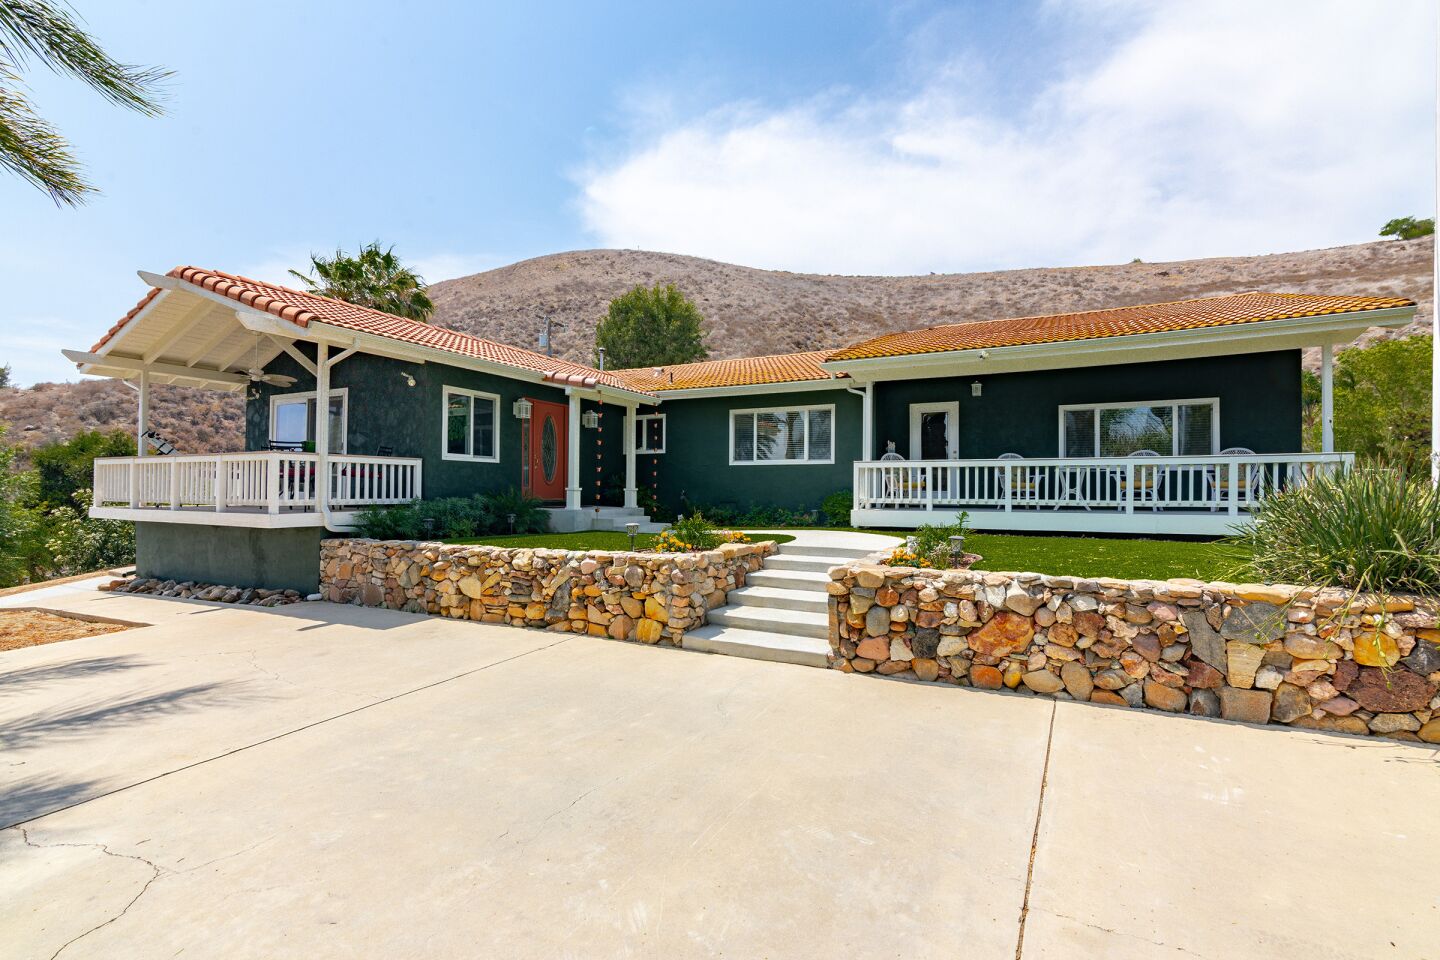 28750 Skipper RoadMurrieta$1,150,000This little slice of heaven sits on nearly 20 acres and has a panoramic view from Santa Rosa Plateau to San Gorgonio. Comprised of 3 bedrooms and 2 baths with 2,190 ESF.Deneen Maillet619.745.5410DRE# 01156679